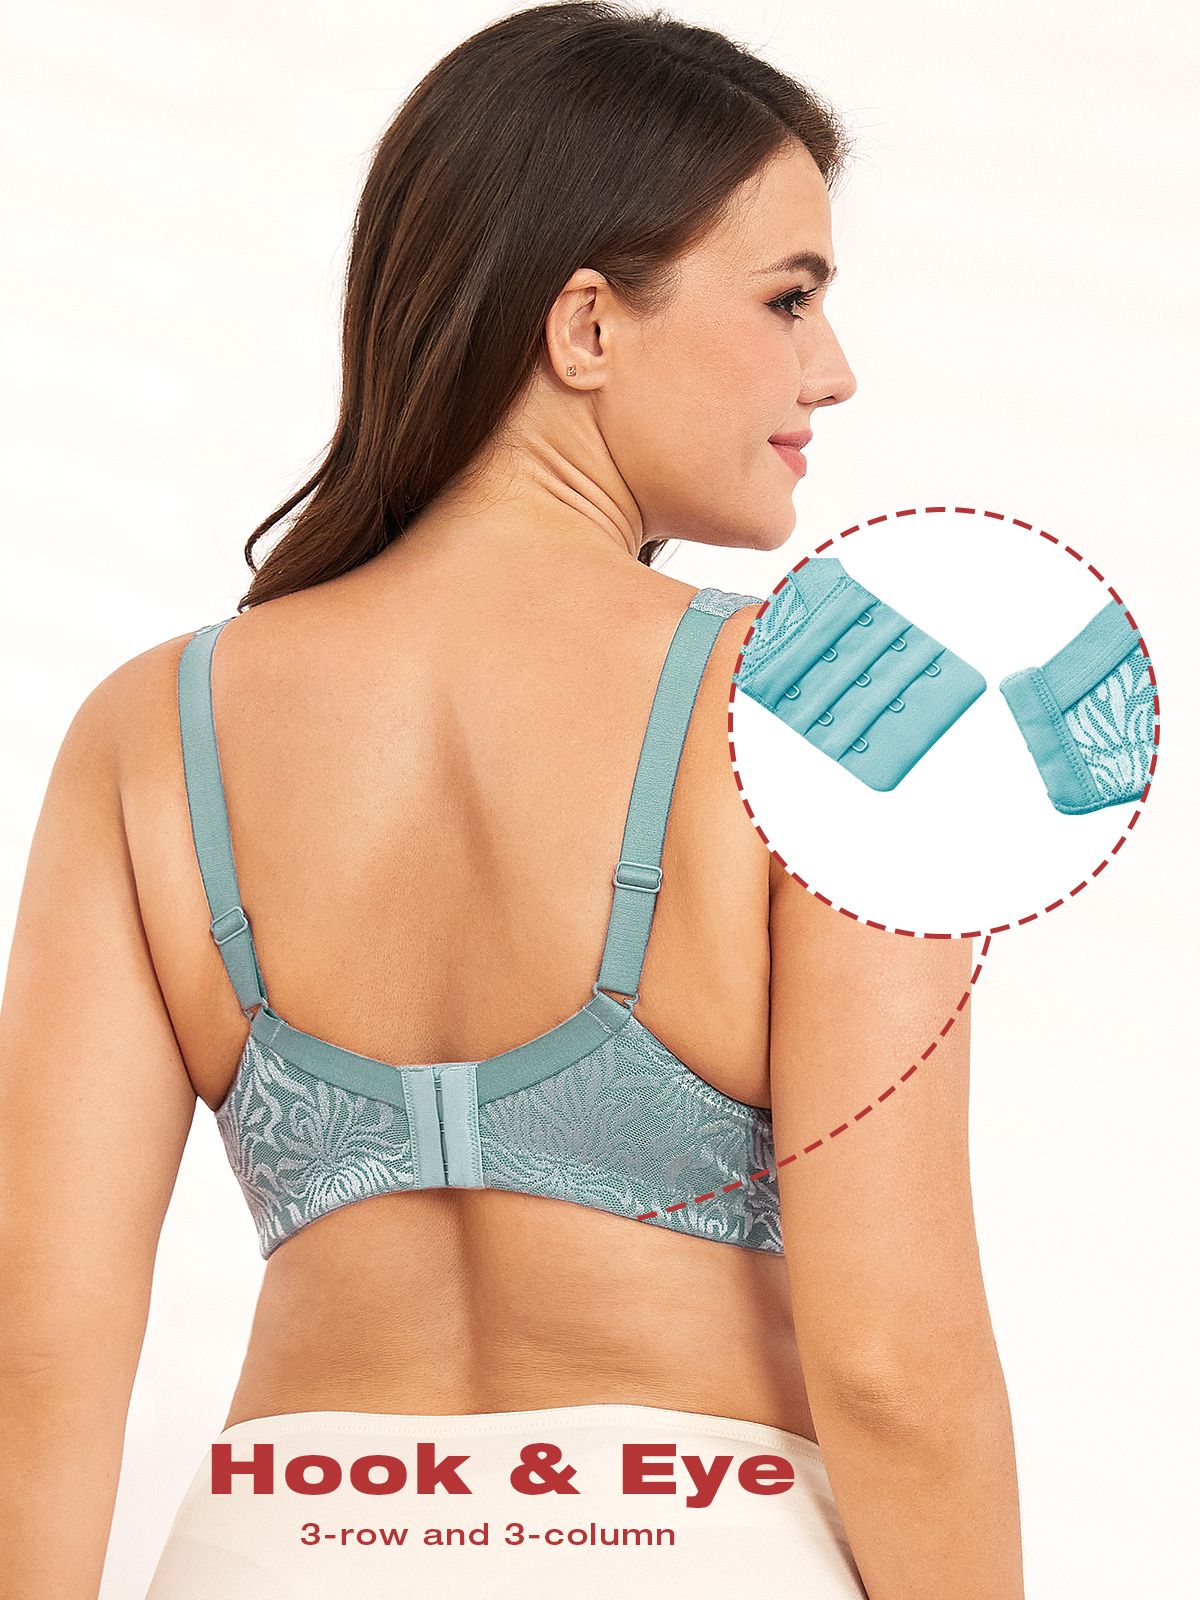 How Can a Bra be Both Soft and Wired? An Oxymoron Explained - Miseczki